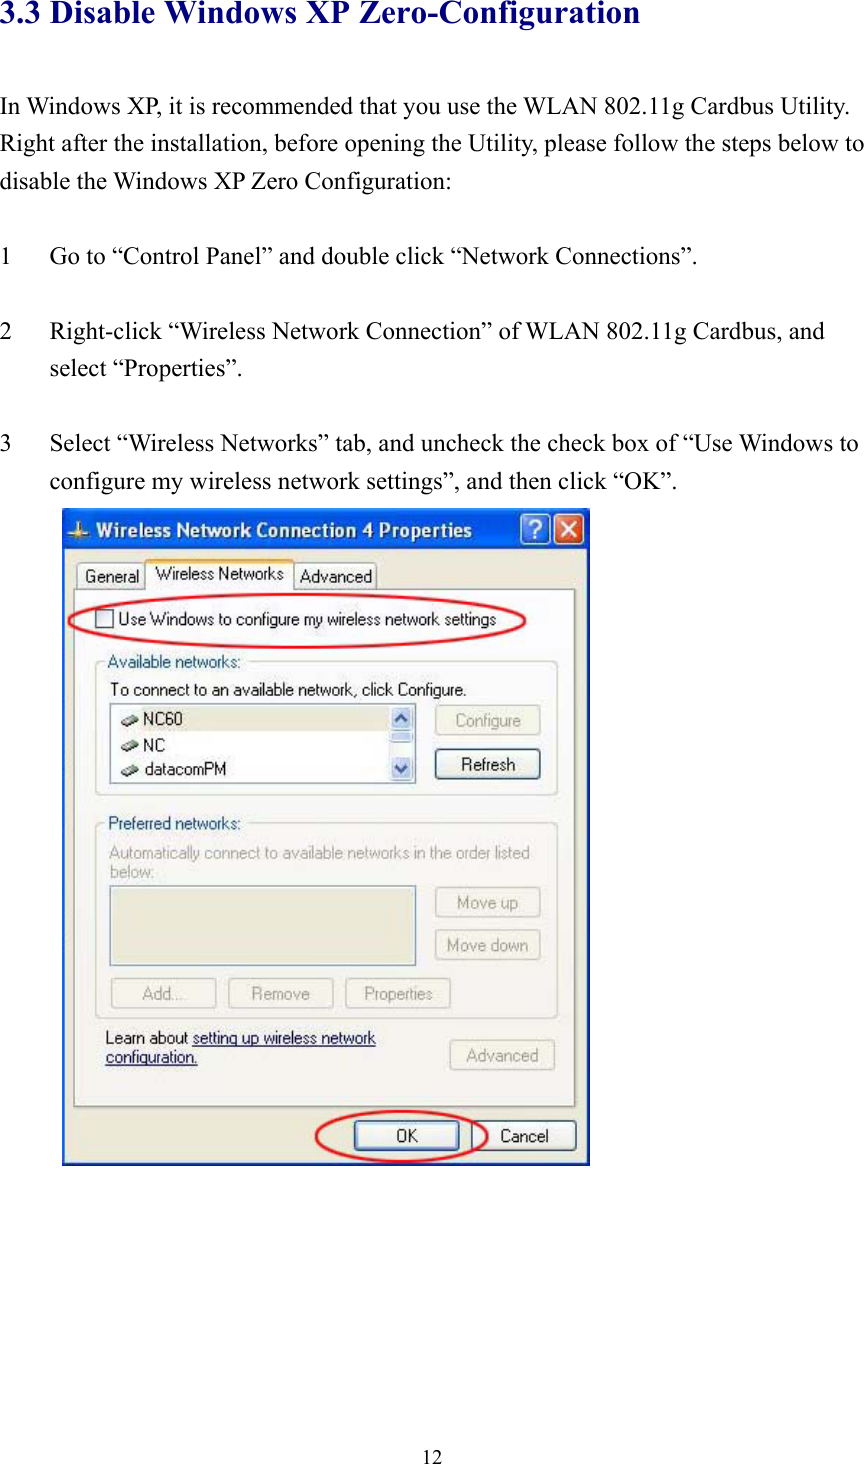  123.3 Disable Windows XP Zero-Configuration  In Windows XP, it is recommended that you use the WLAN 802.11g Cardbus Utility.   Right after the installation, before opening the Utility, please follow the steps below to disable the Windows XP Zero Configuration:  1  Go to “Control Panel” and double click “Network Connections”.  2  Right-click “Wireless Network Connection” of WLAN 802.11g Cardbus, and select “Properties”.  3  Select “Wireless Networks” tab, and uncheck the check box of “Use Windows to configure my wireless network settings”, and then click “OK”.   